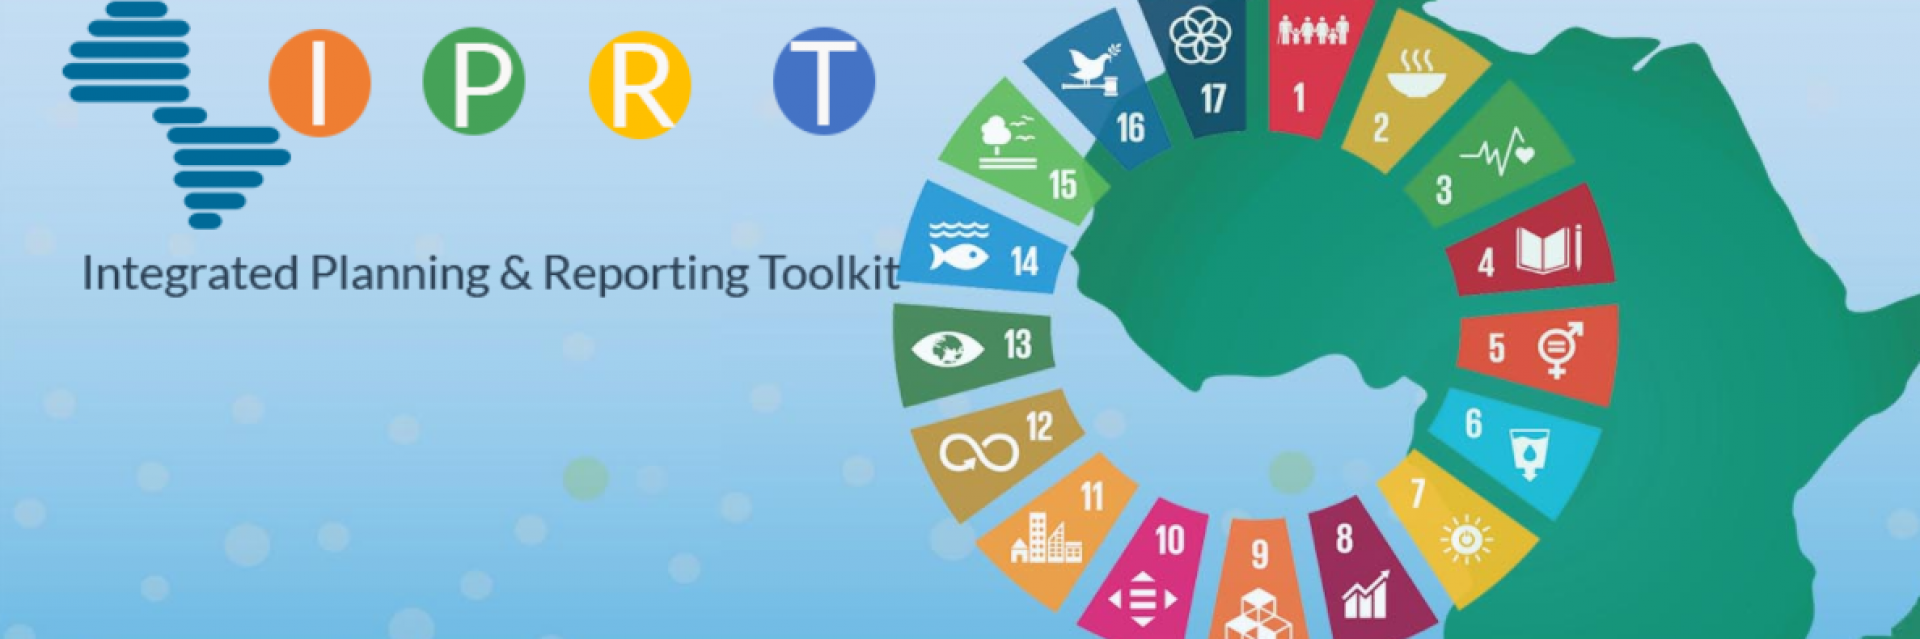 Applied Training on Integrated Planning and Reporting Toolkit (IPRT)